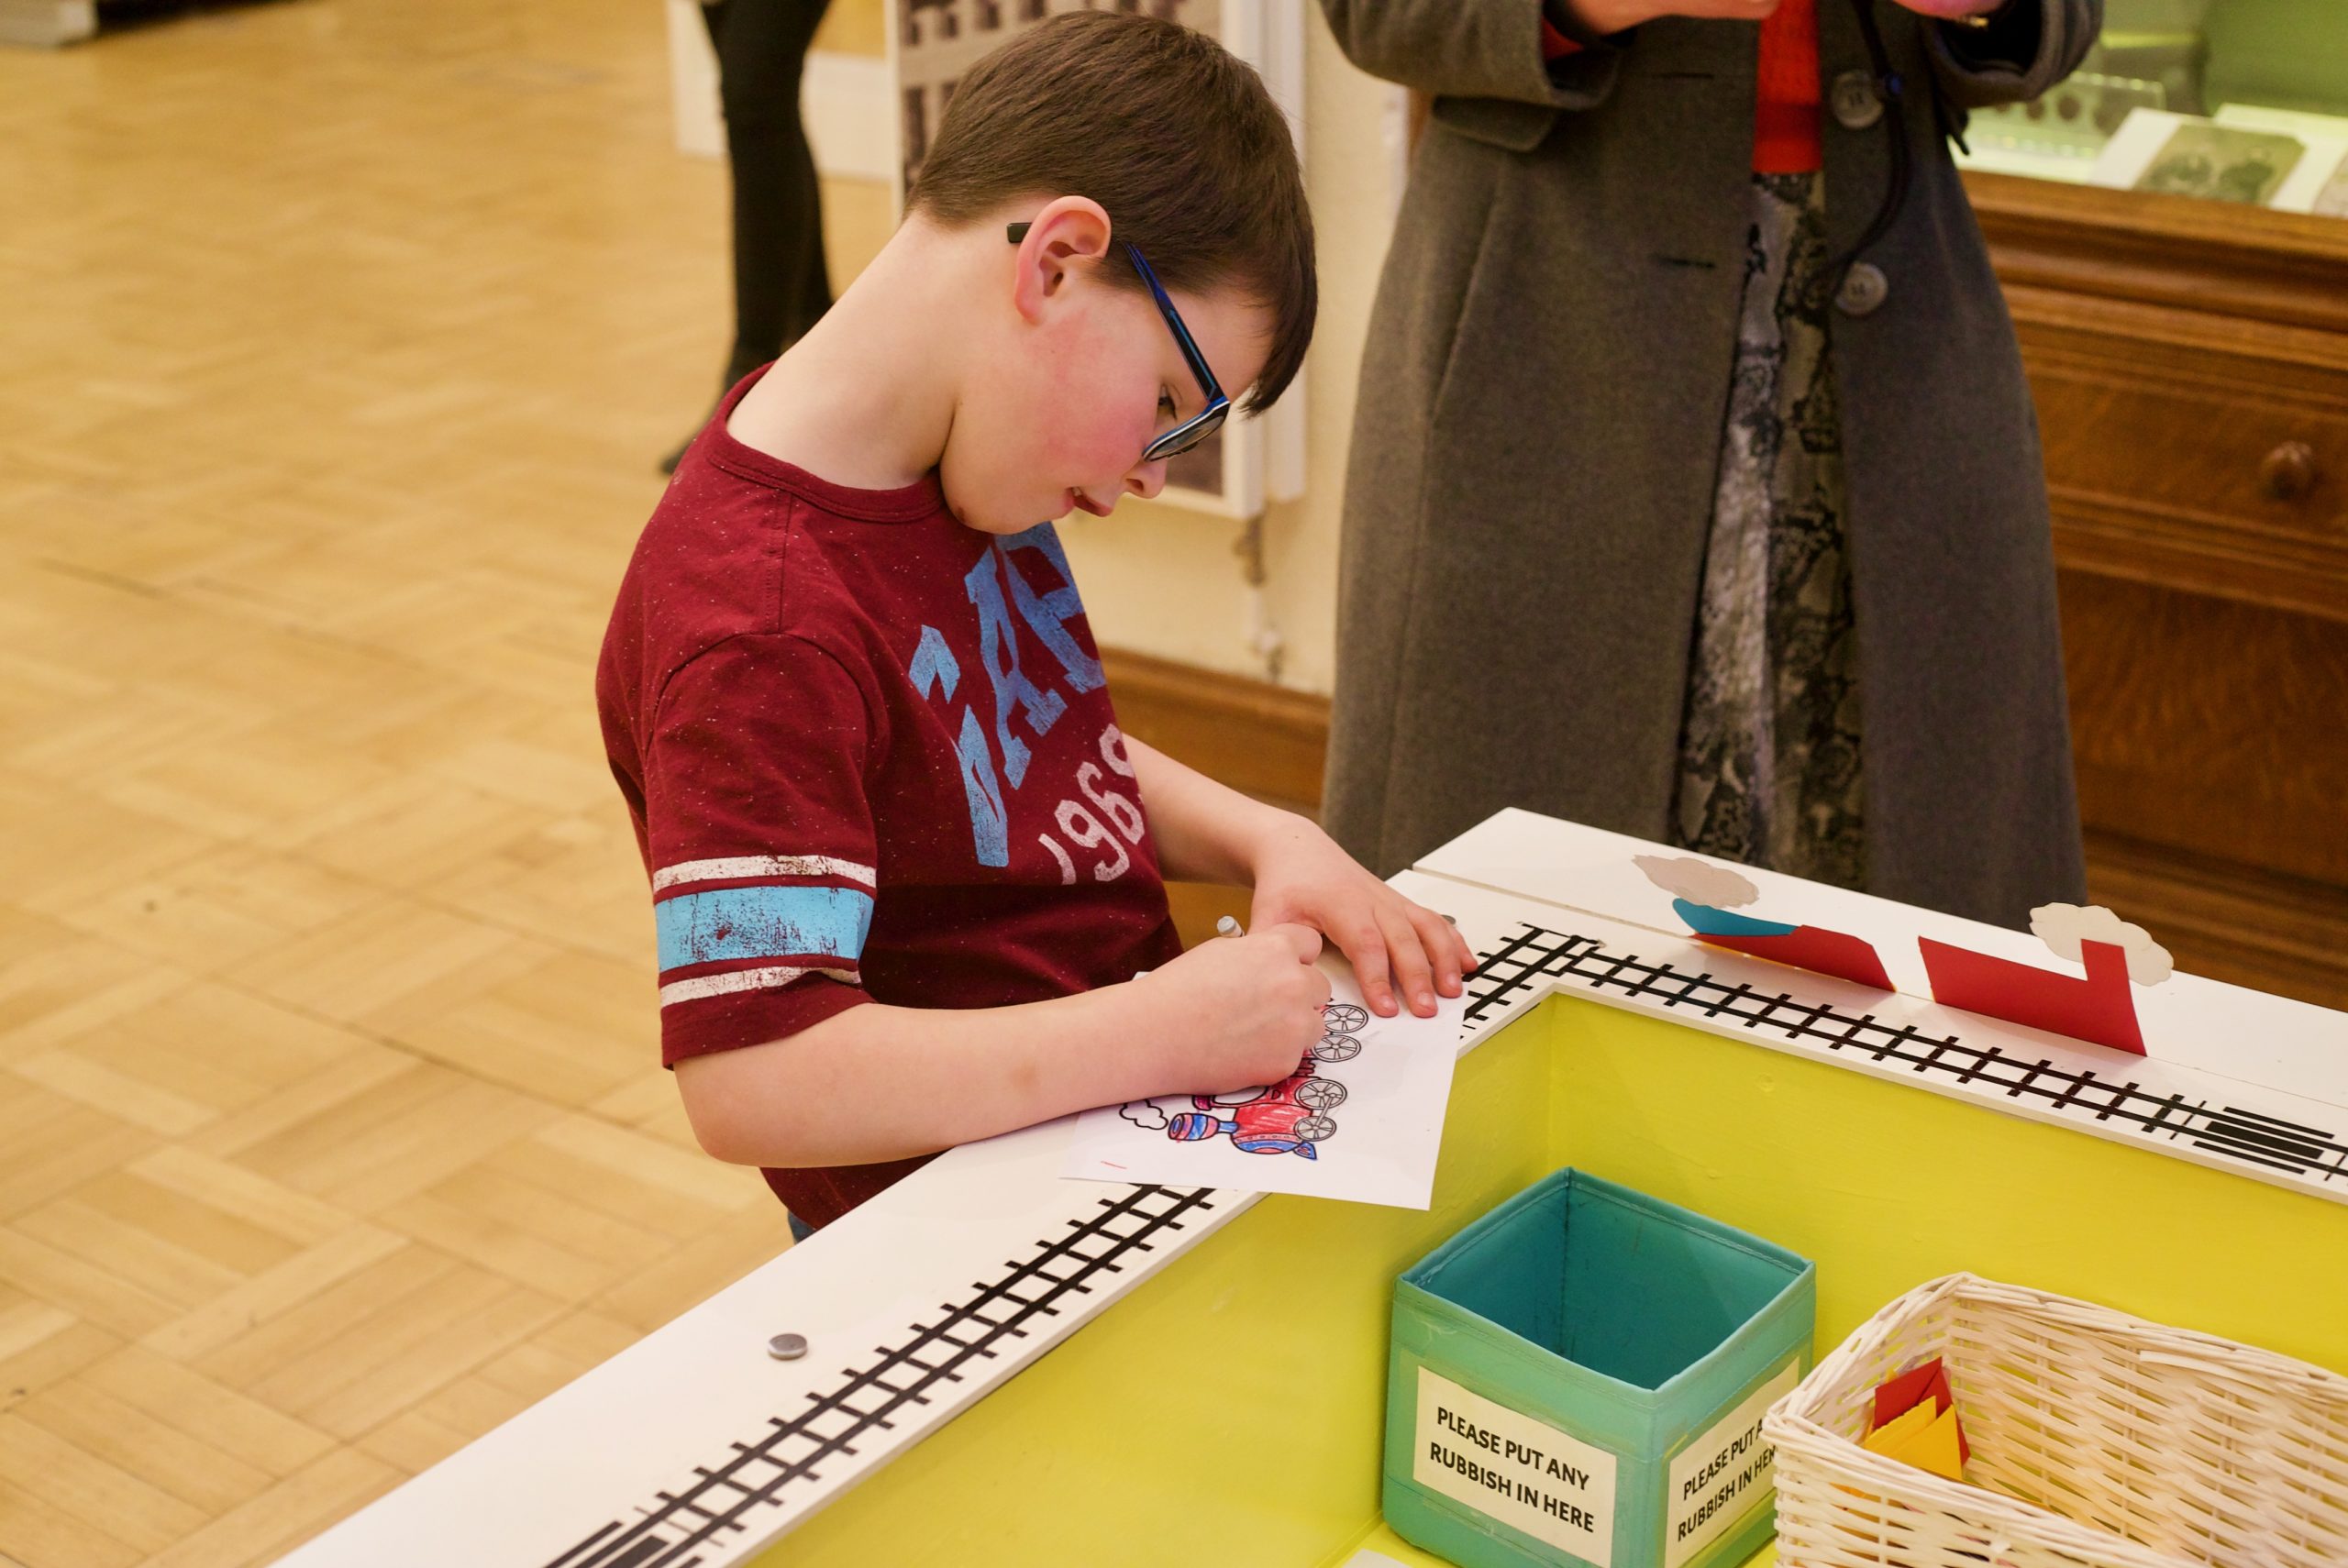 A young boy colouring next to an activity station at the Andrew Carnegie Birthplace Museum.